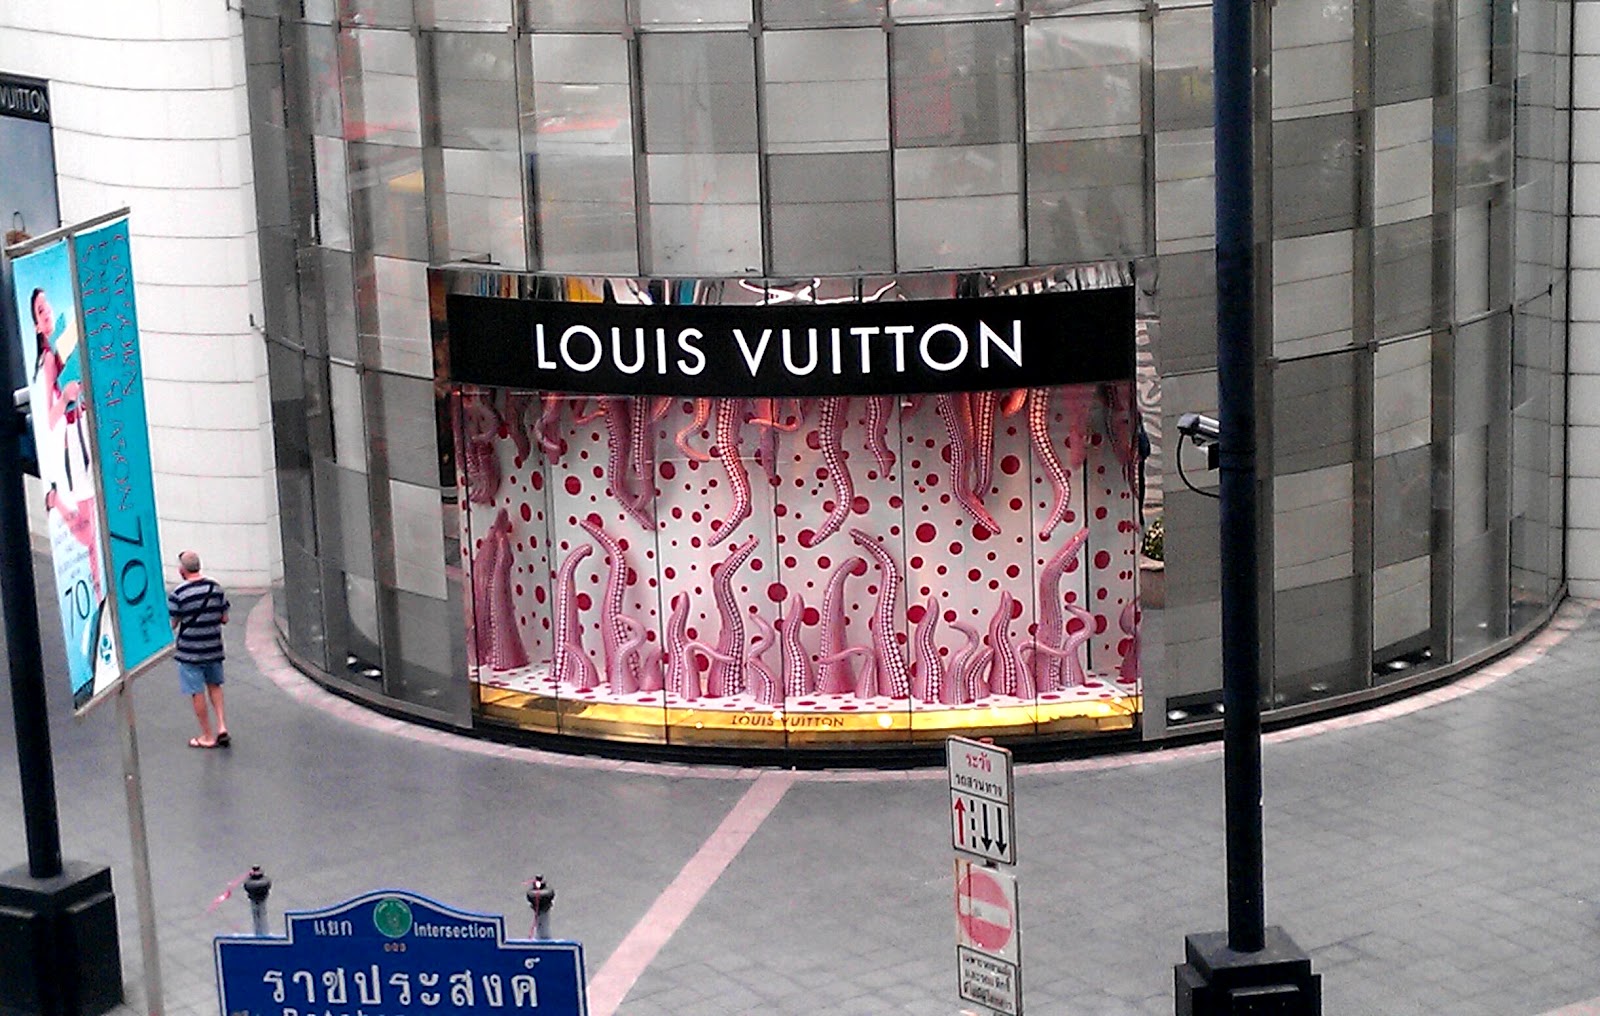 On the Louis Vuitton windows in Westfield London - MadonnaTribe Decade